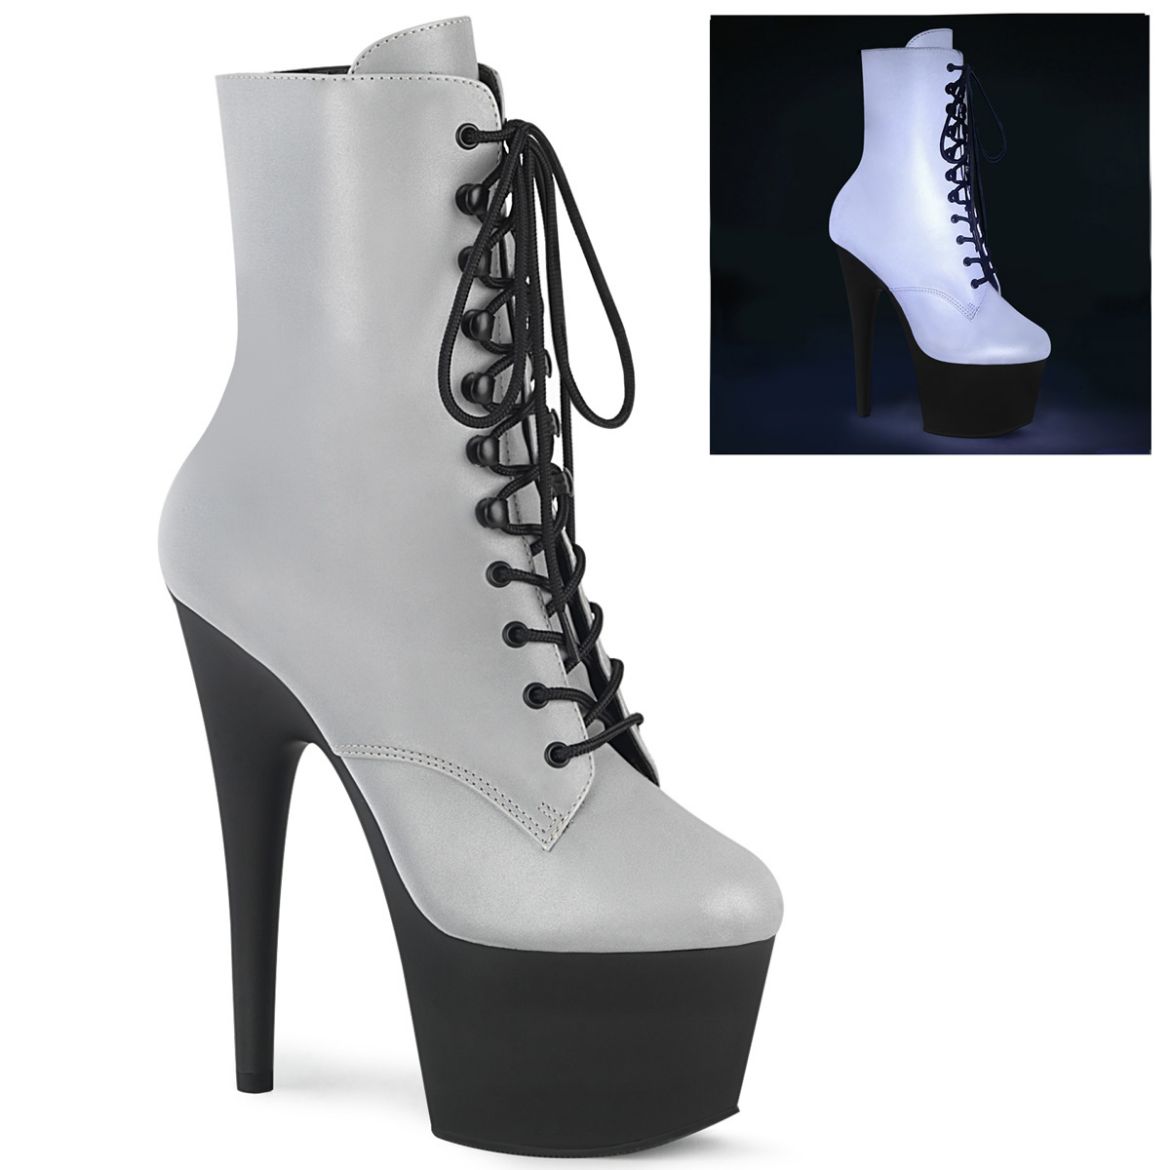 Product image of Pleaser ADORE-1020REFL Silver Reflective/Black Matte 7 inch (17.8 cm) Heel 2 3/4 inch (7 cm) Platform Lace-Up Front Ankle Boot Side Zip